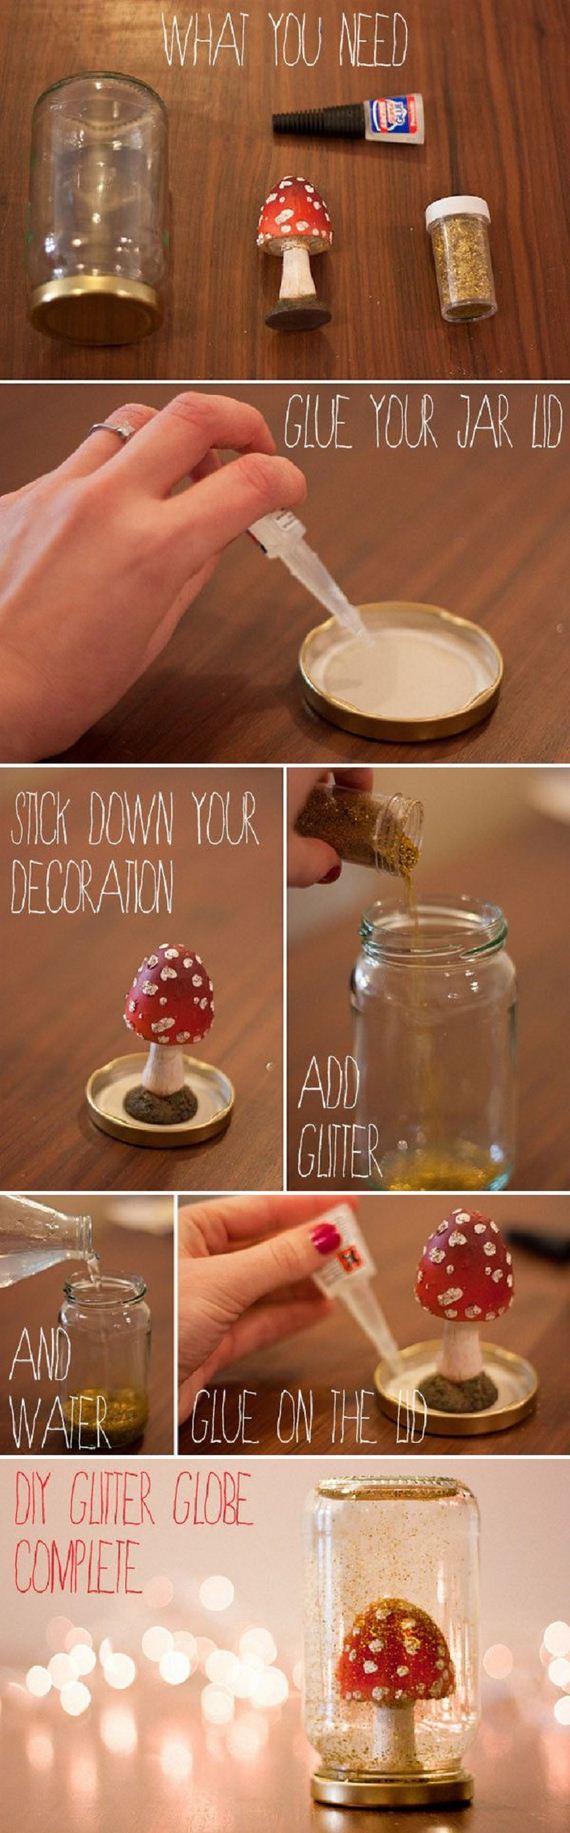 16-diy-home-craft-ideas-and-tips-thrifty-home-decor-1